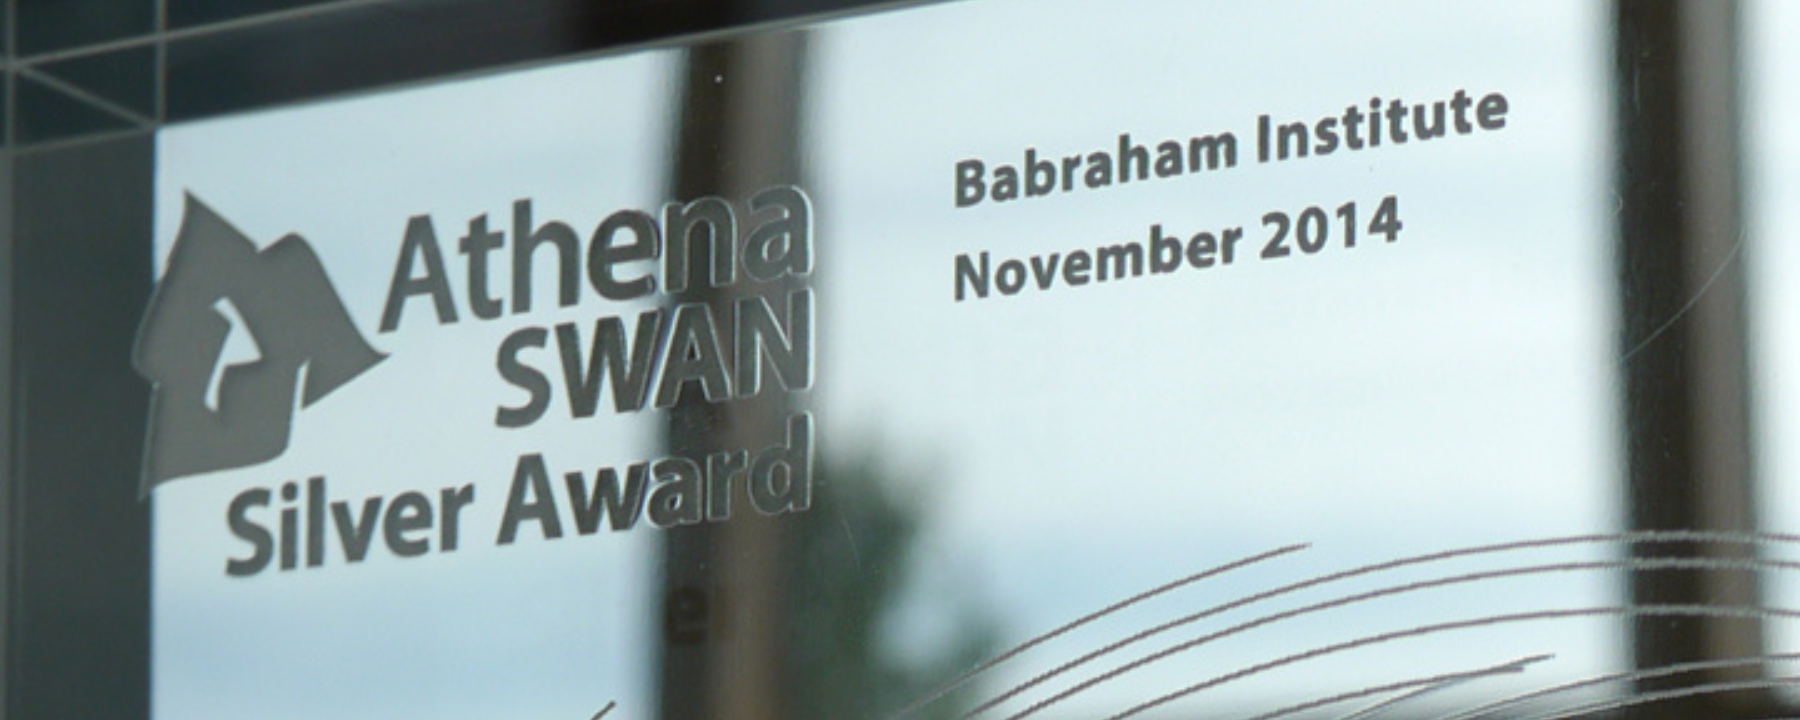 Photo of the Ƶ's Athena SWAN Silver Award from 2014